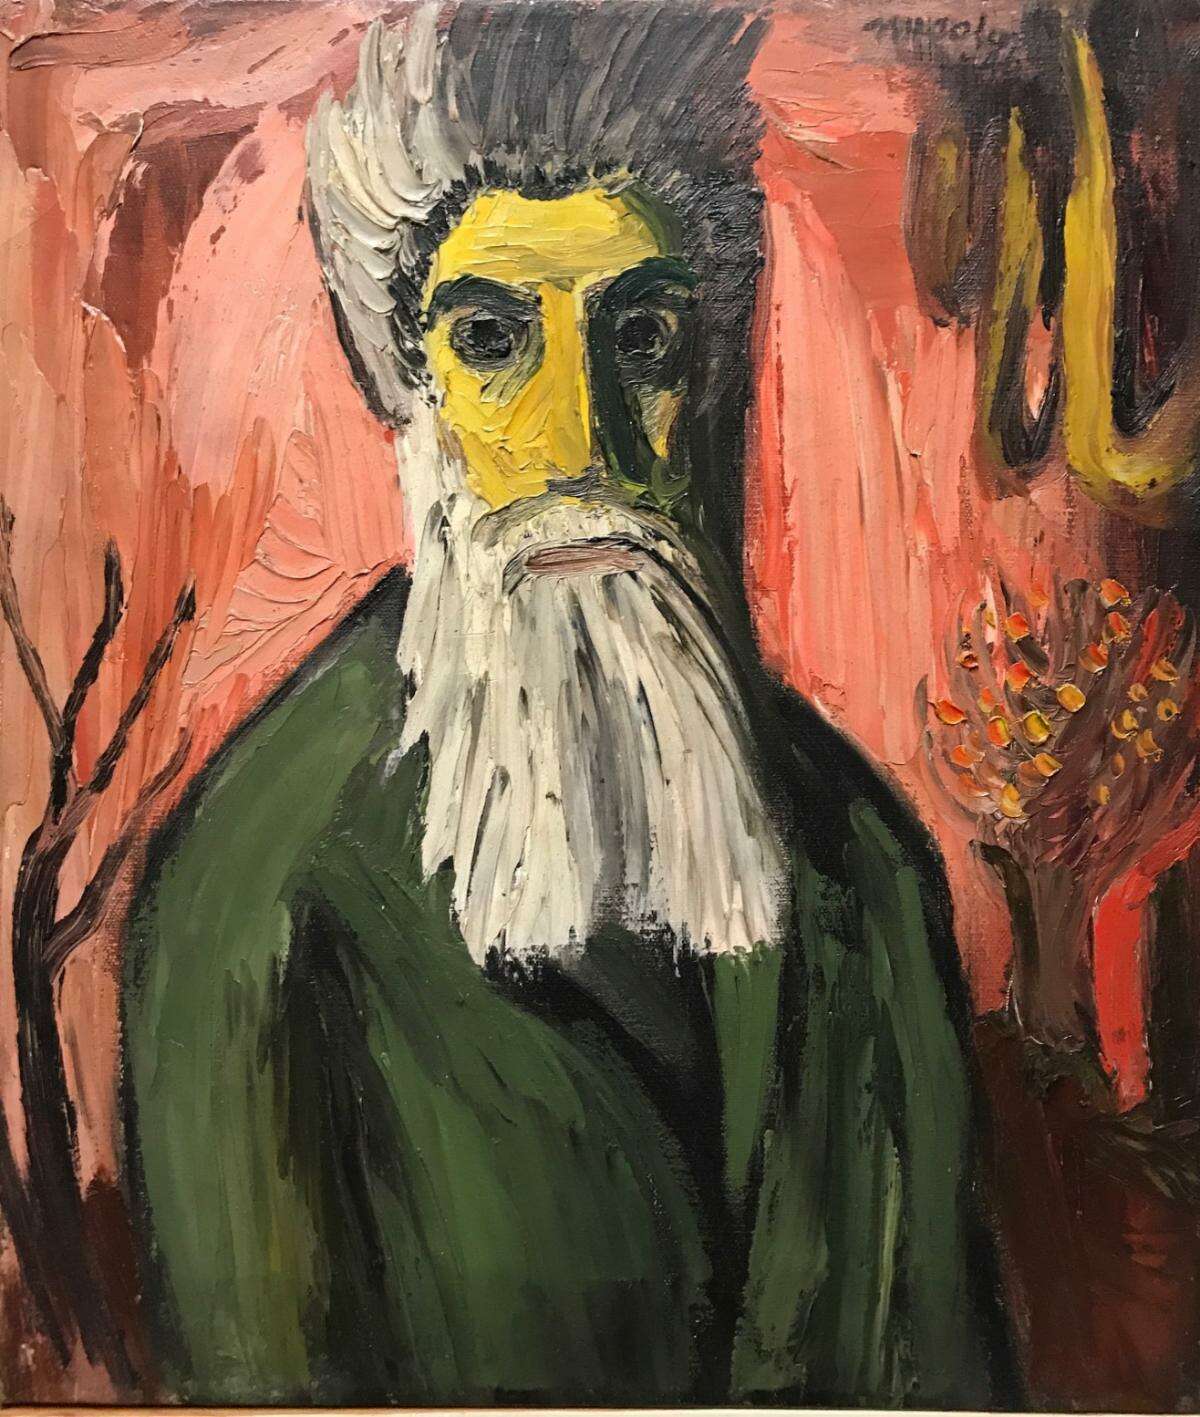 A painting of abolitionist John Brown, by Ervin Nussbaum.